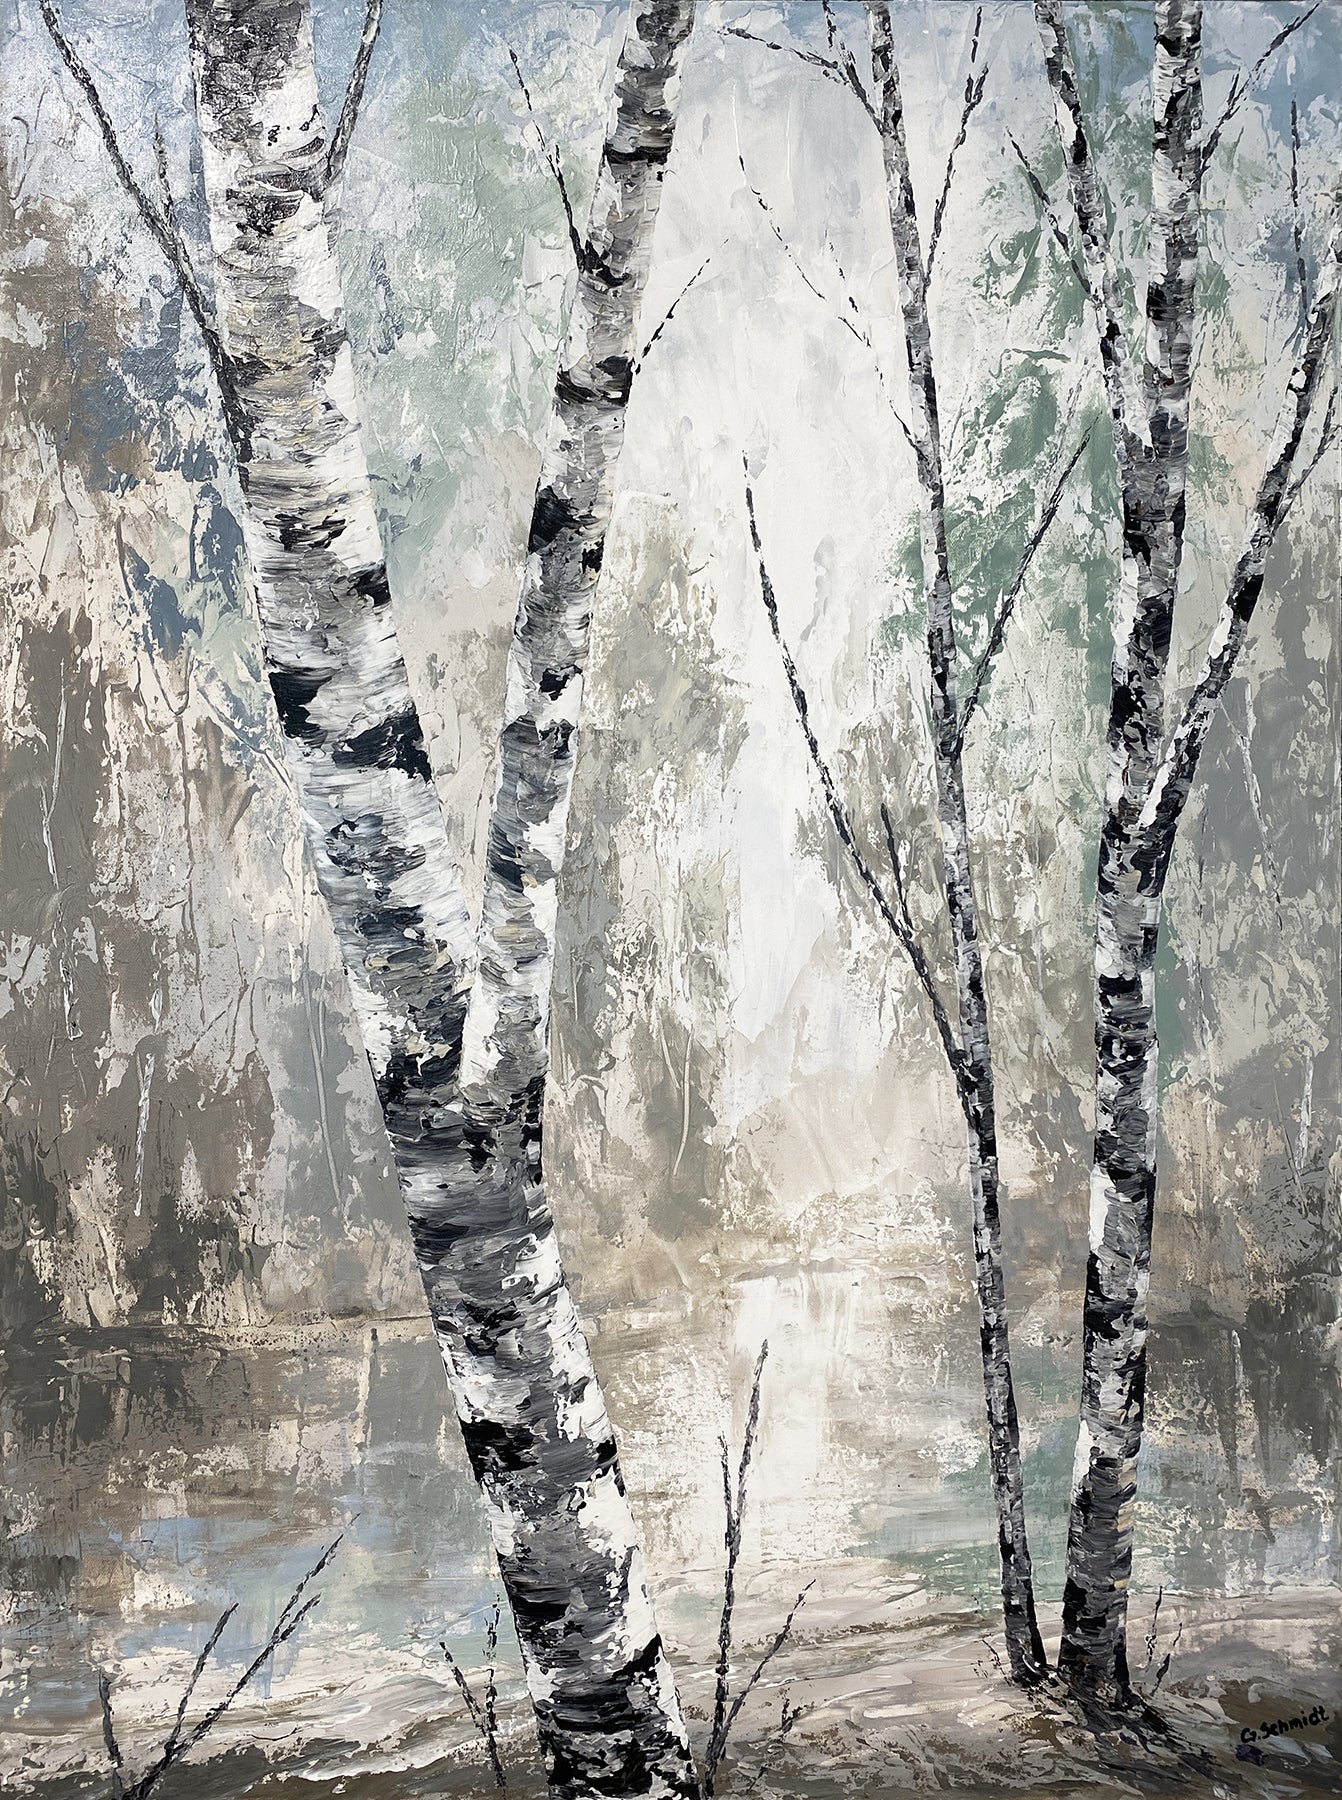 Morning Mist by Gerd Schmidt. A stunning original painting of birch trees by Gerd Schmidt that showcases the beauty of quiet forest scenery.